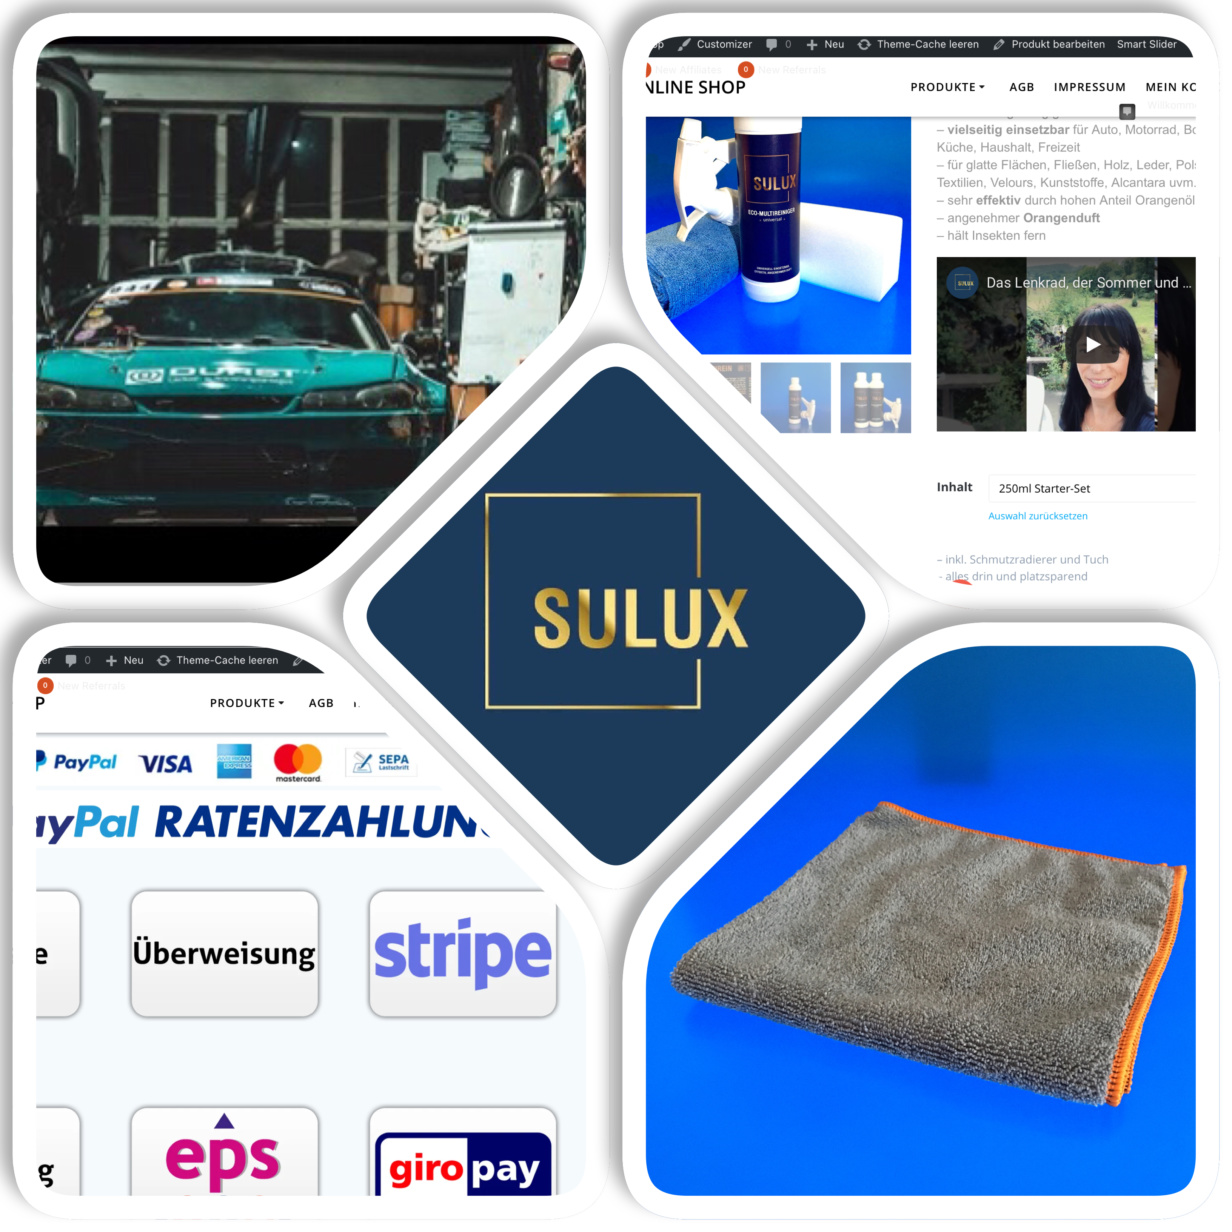 SULUX-News August 2020/ 2